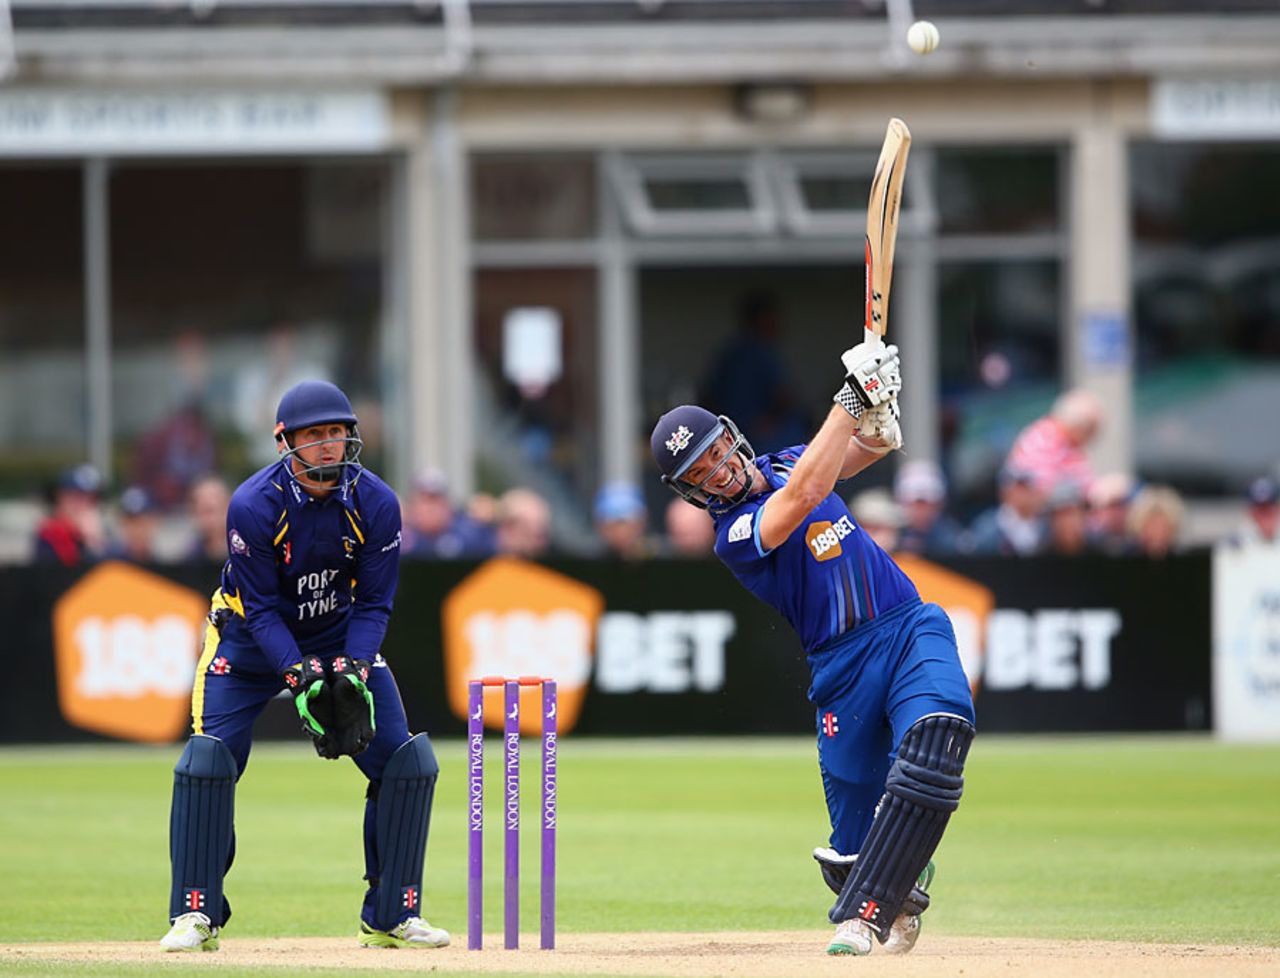 Michael Klinger's prolific season continued with another hundred, Gloucestershire v Durham, Royal London Cup, Group A, Bristol, August 4, 2015